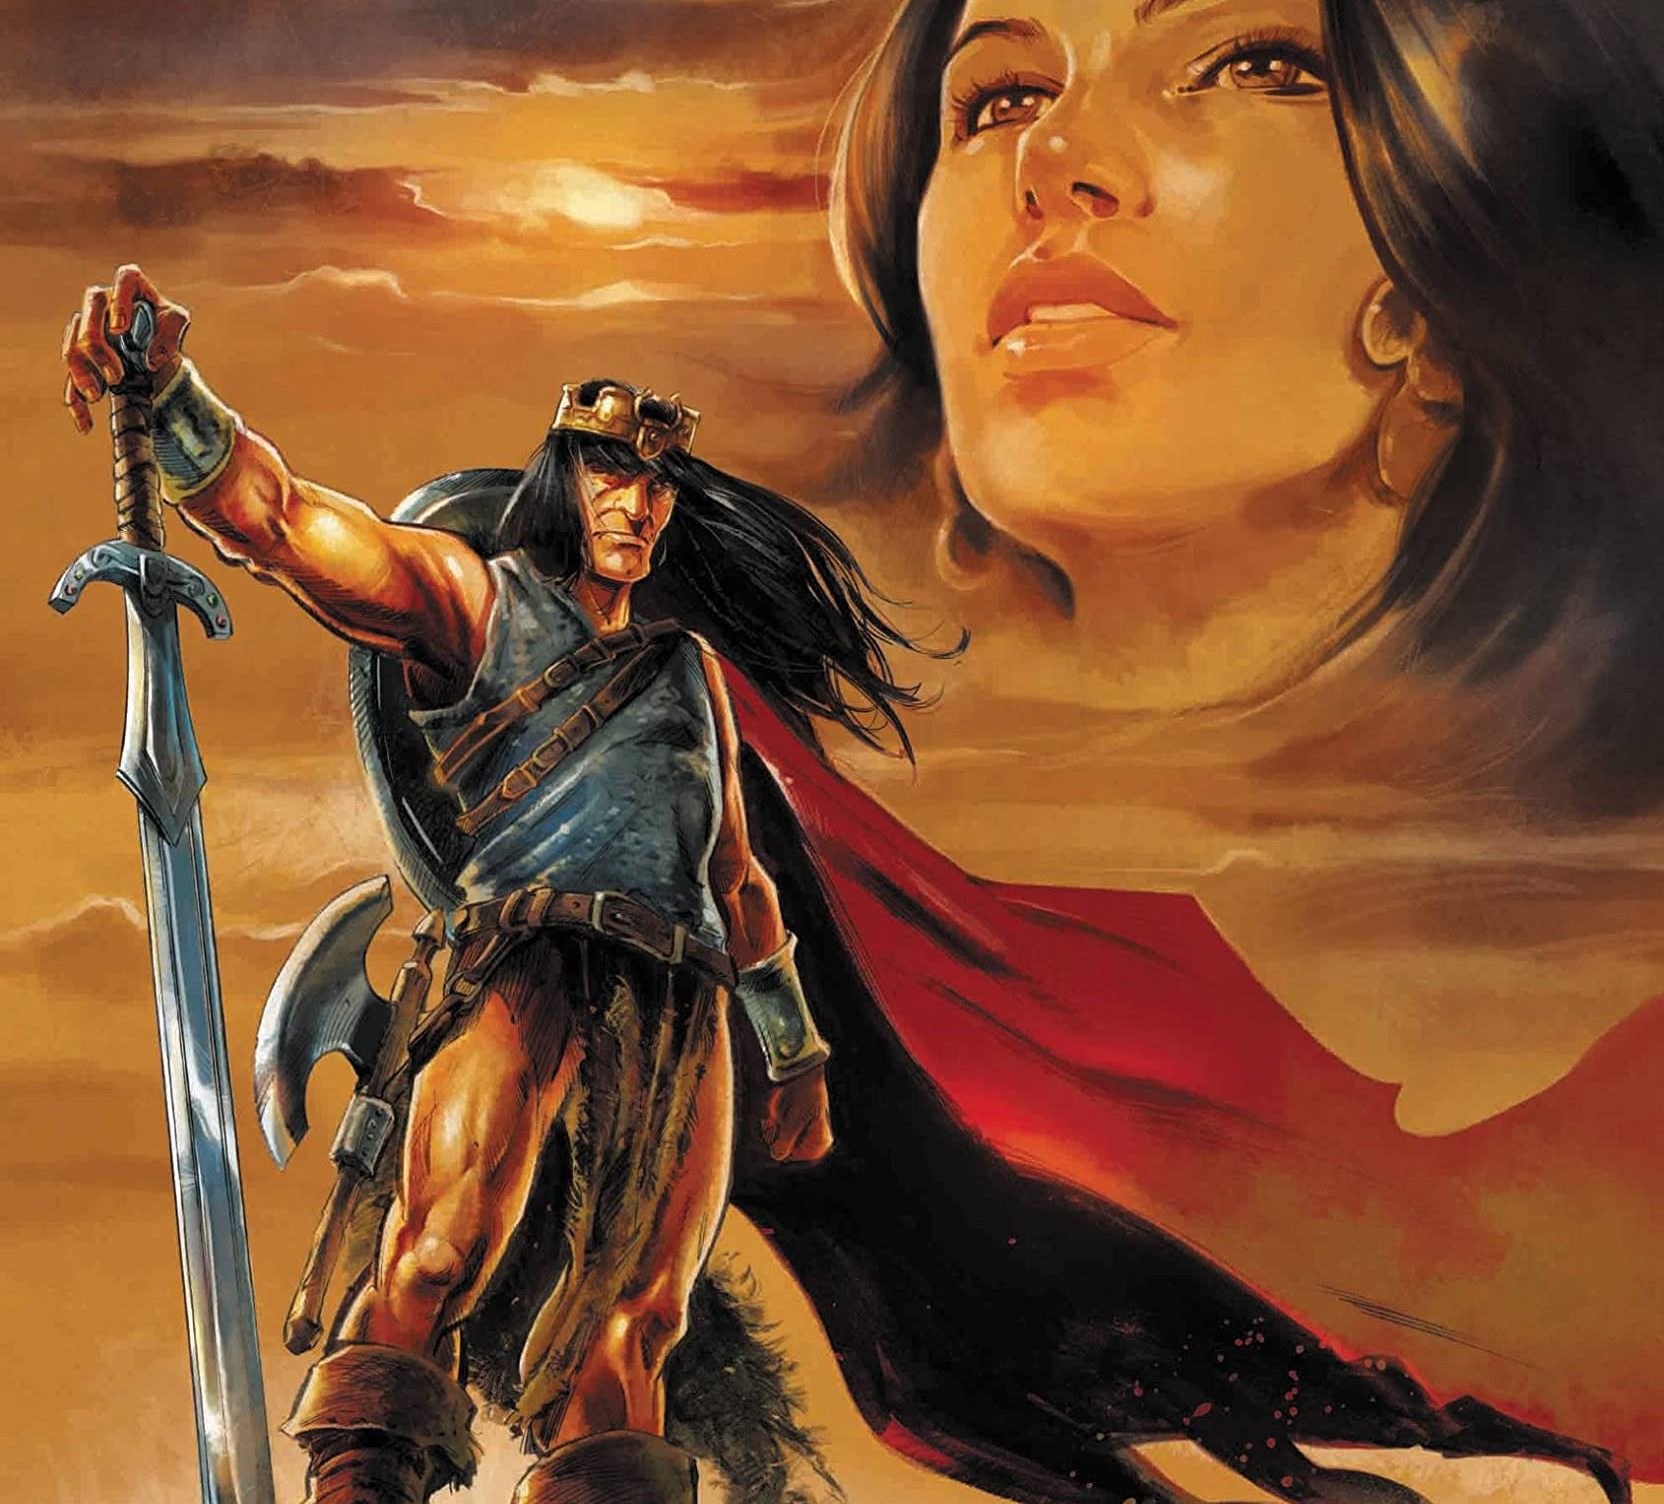 King Conan Chronicles Epic Collection: Phantoms and Phoenixes